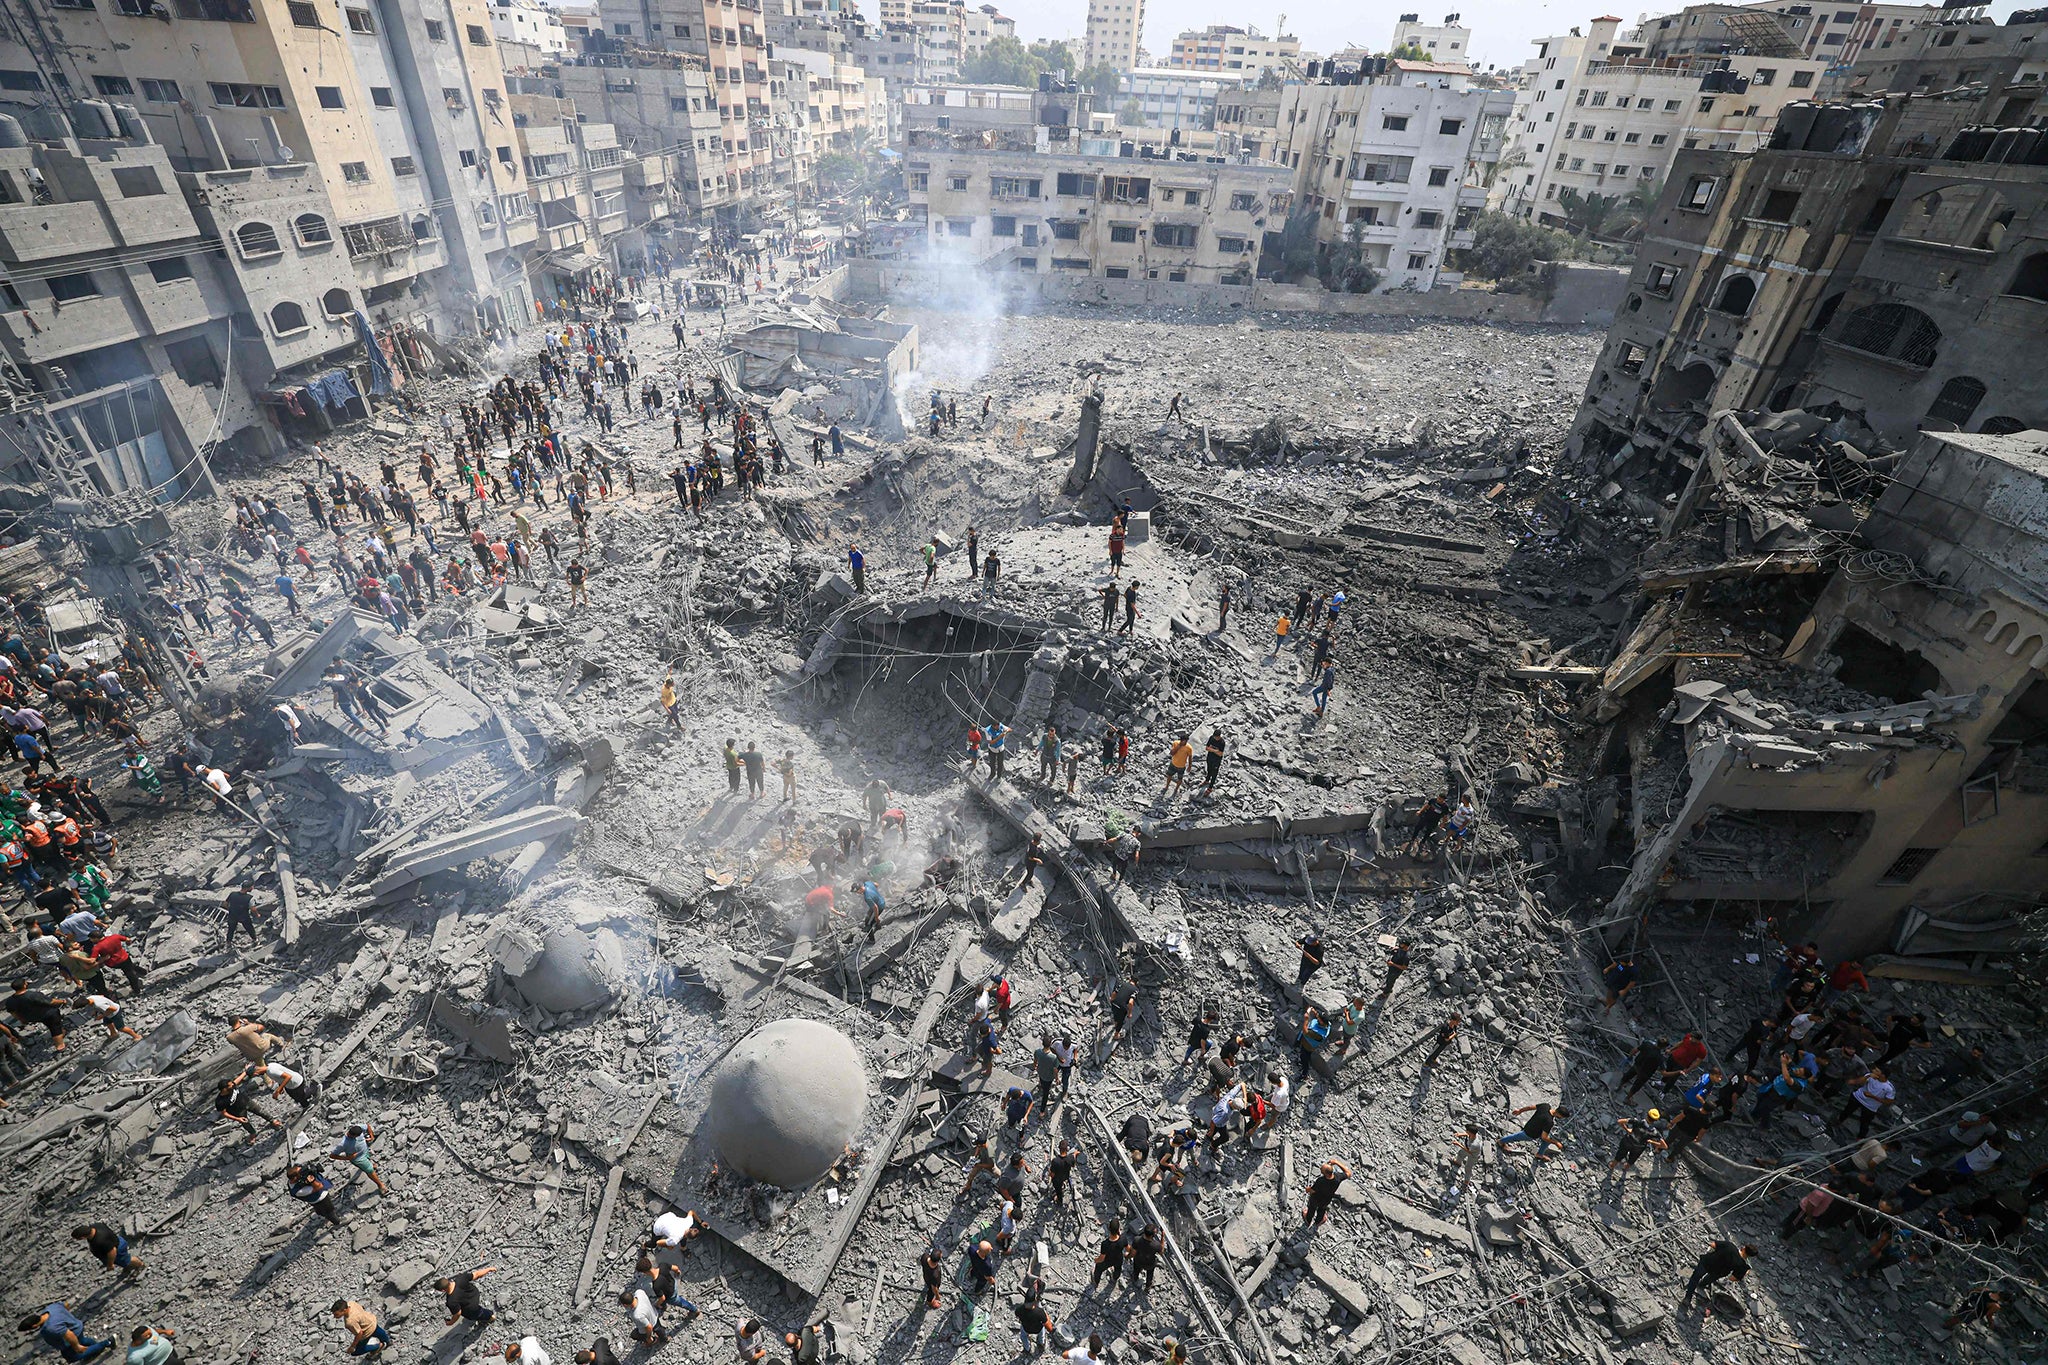 Palestinians inspect the damage following an Israeli airstrike on the Sousi mosque in Gaza City